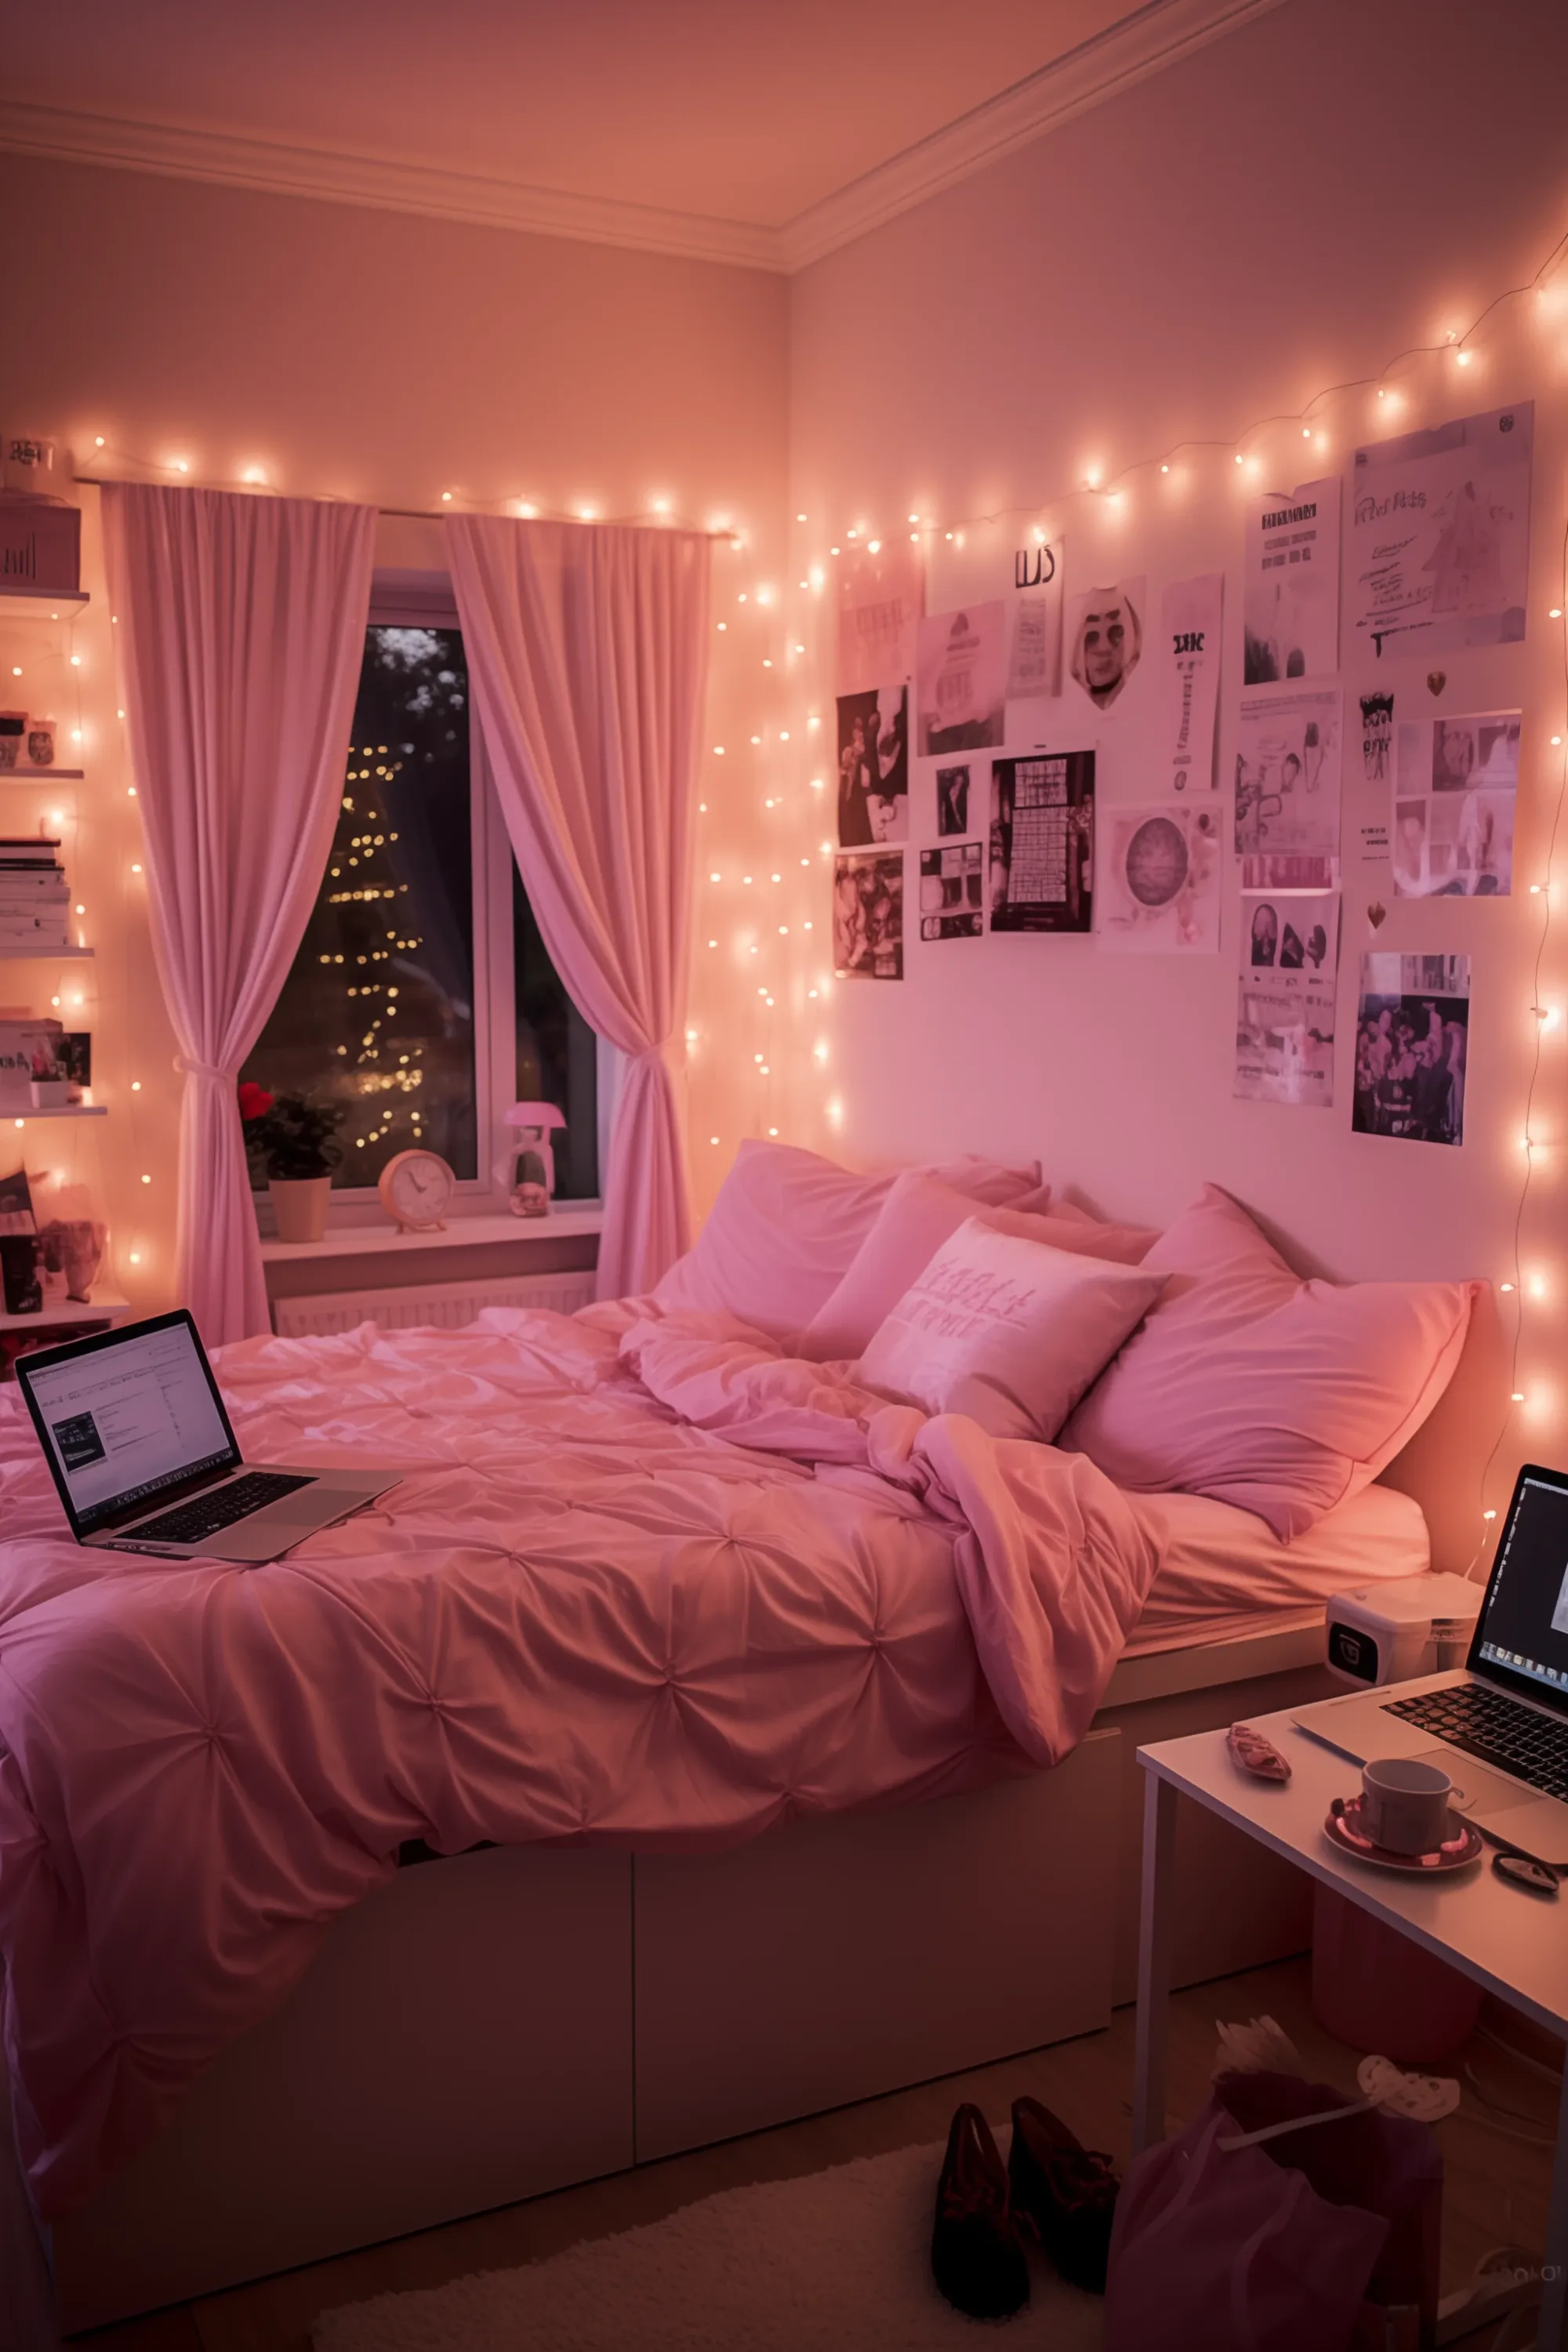 A pink and white bedroom